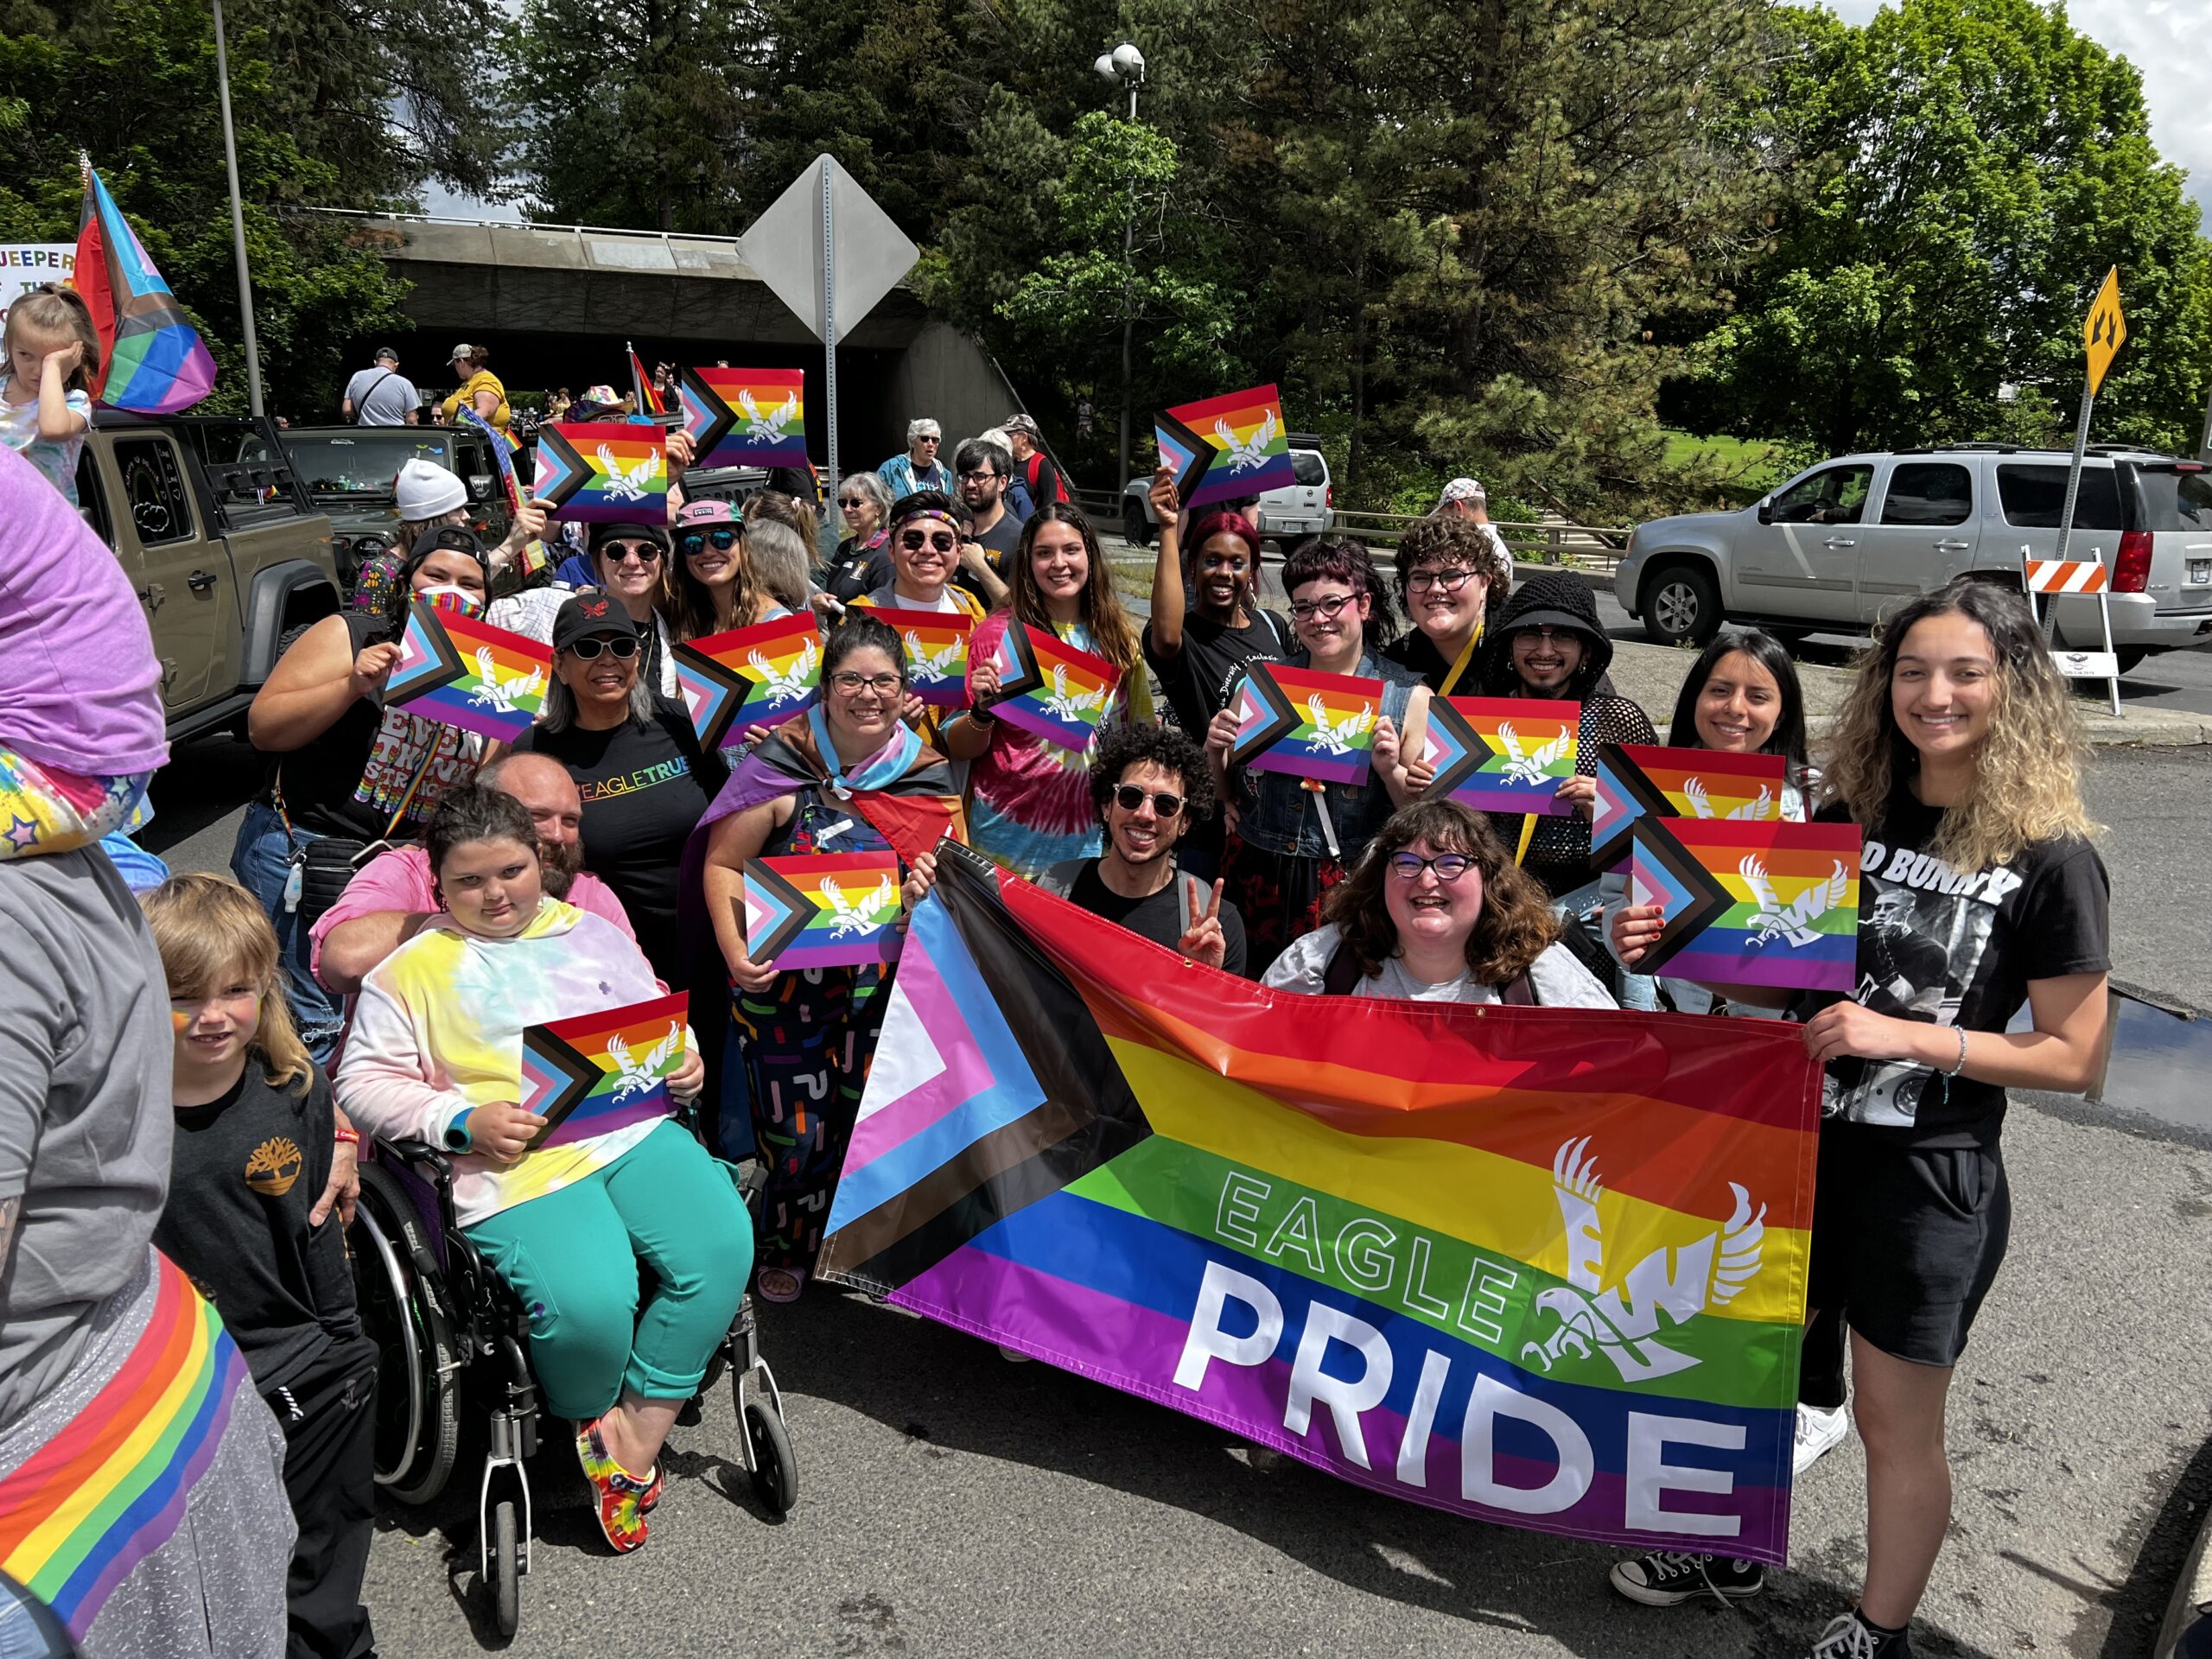 EWU students and staff holding EWU pride banners at a parade